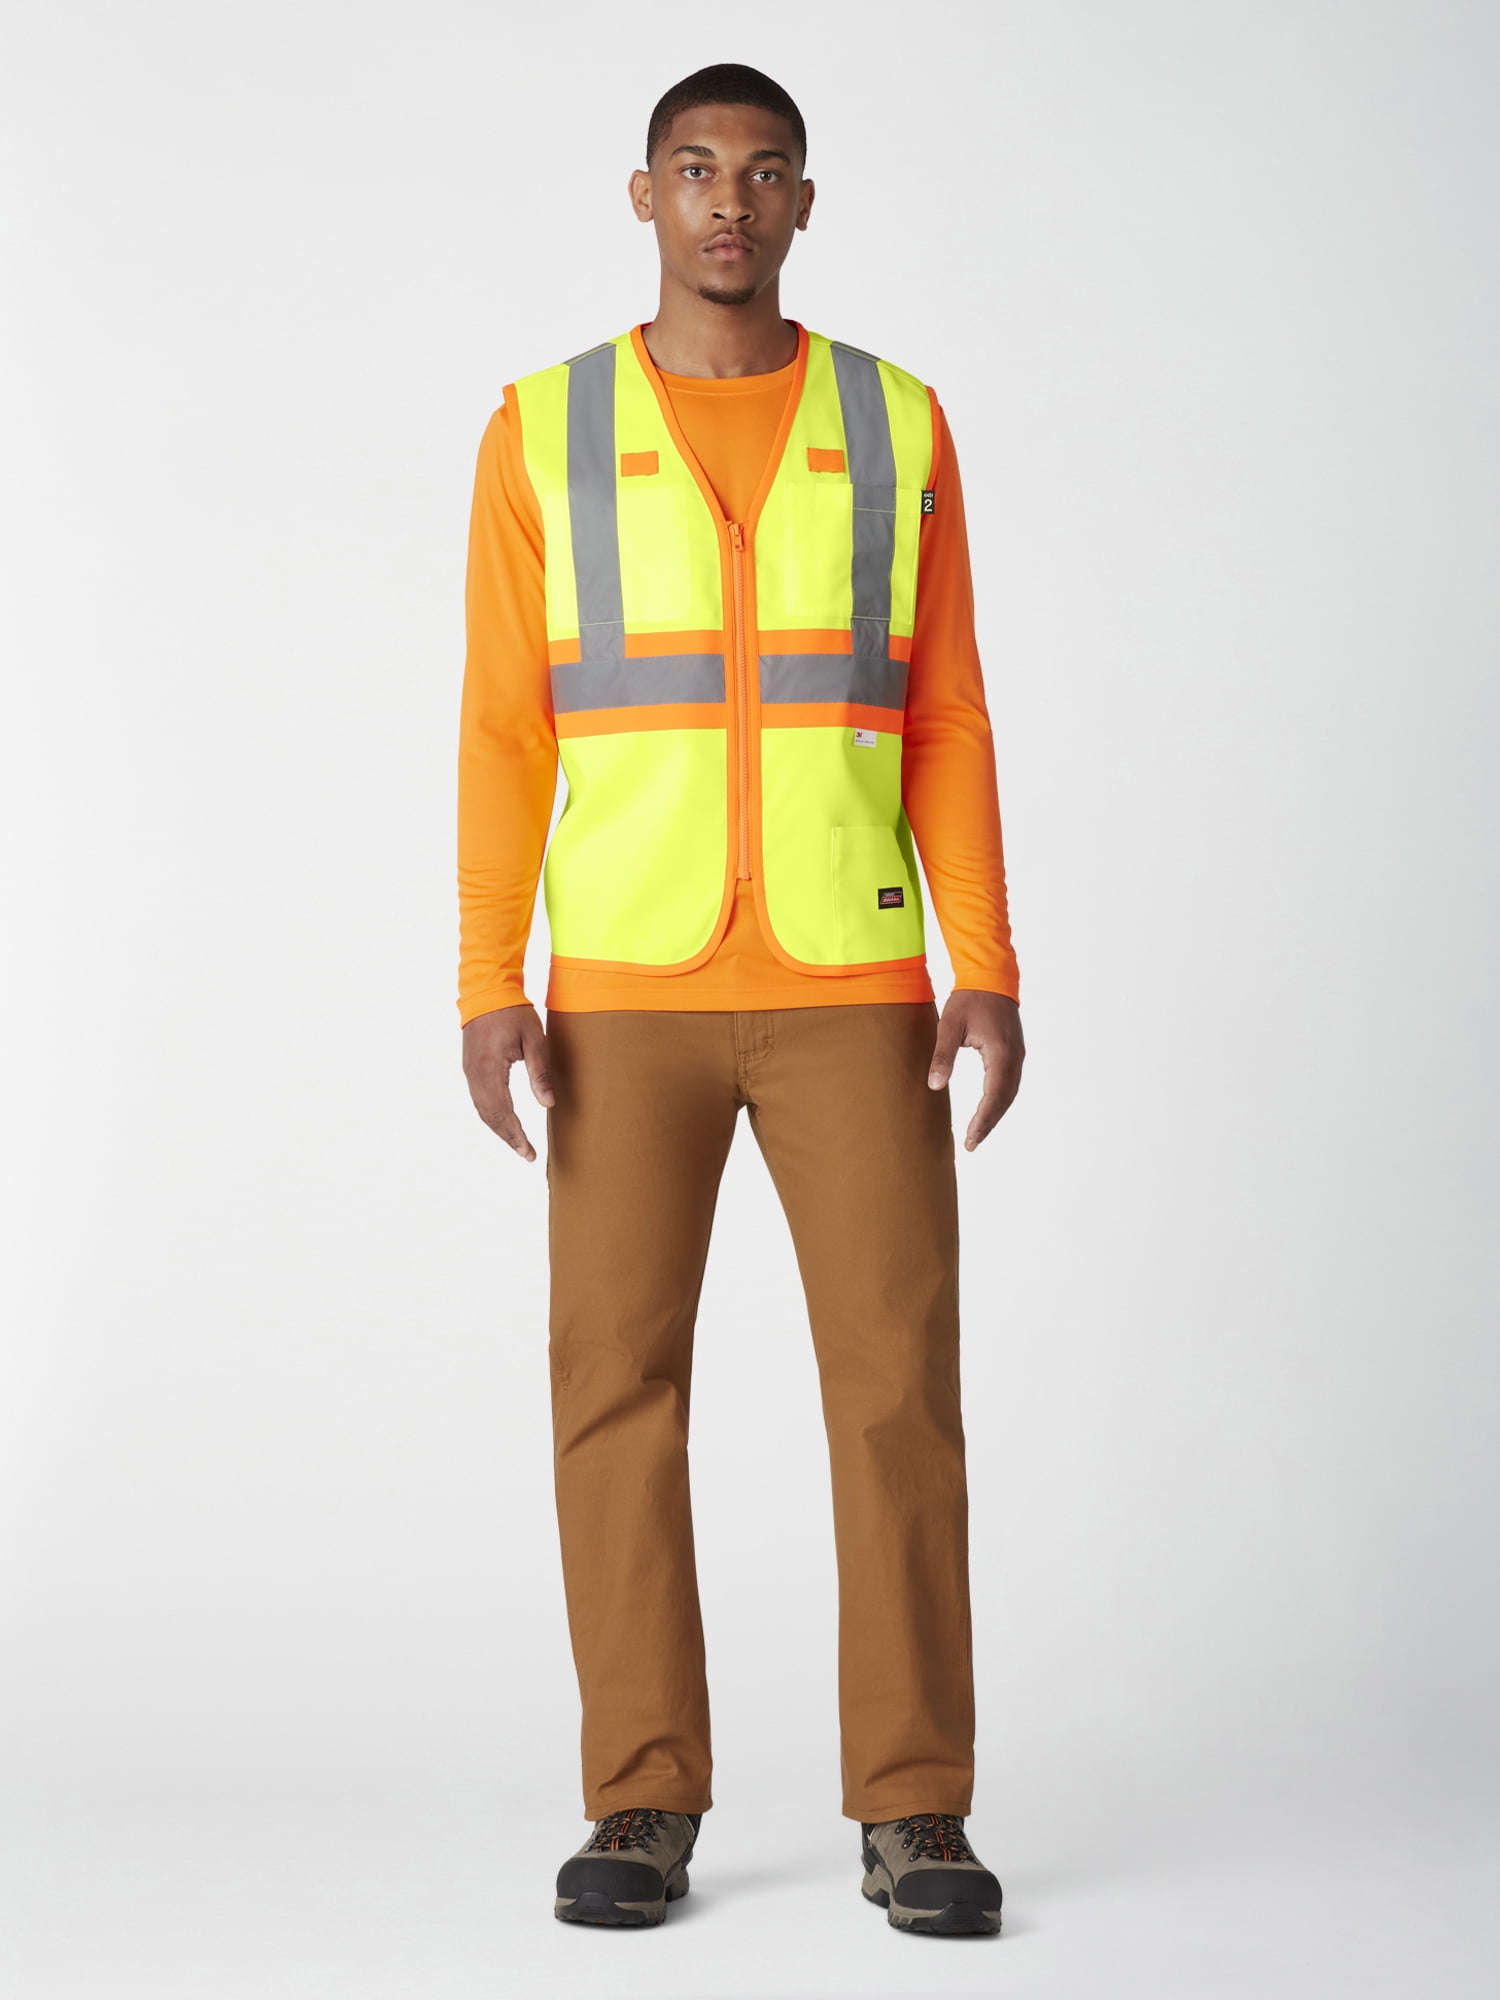 Genuine Dickies Hi-Vis Synthetic Vest, 3M™ Scotchlite™ Reflective Taping,  ANSI Class 2 